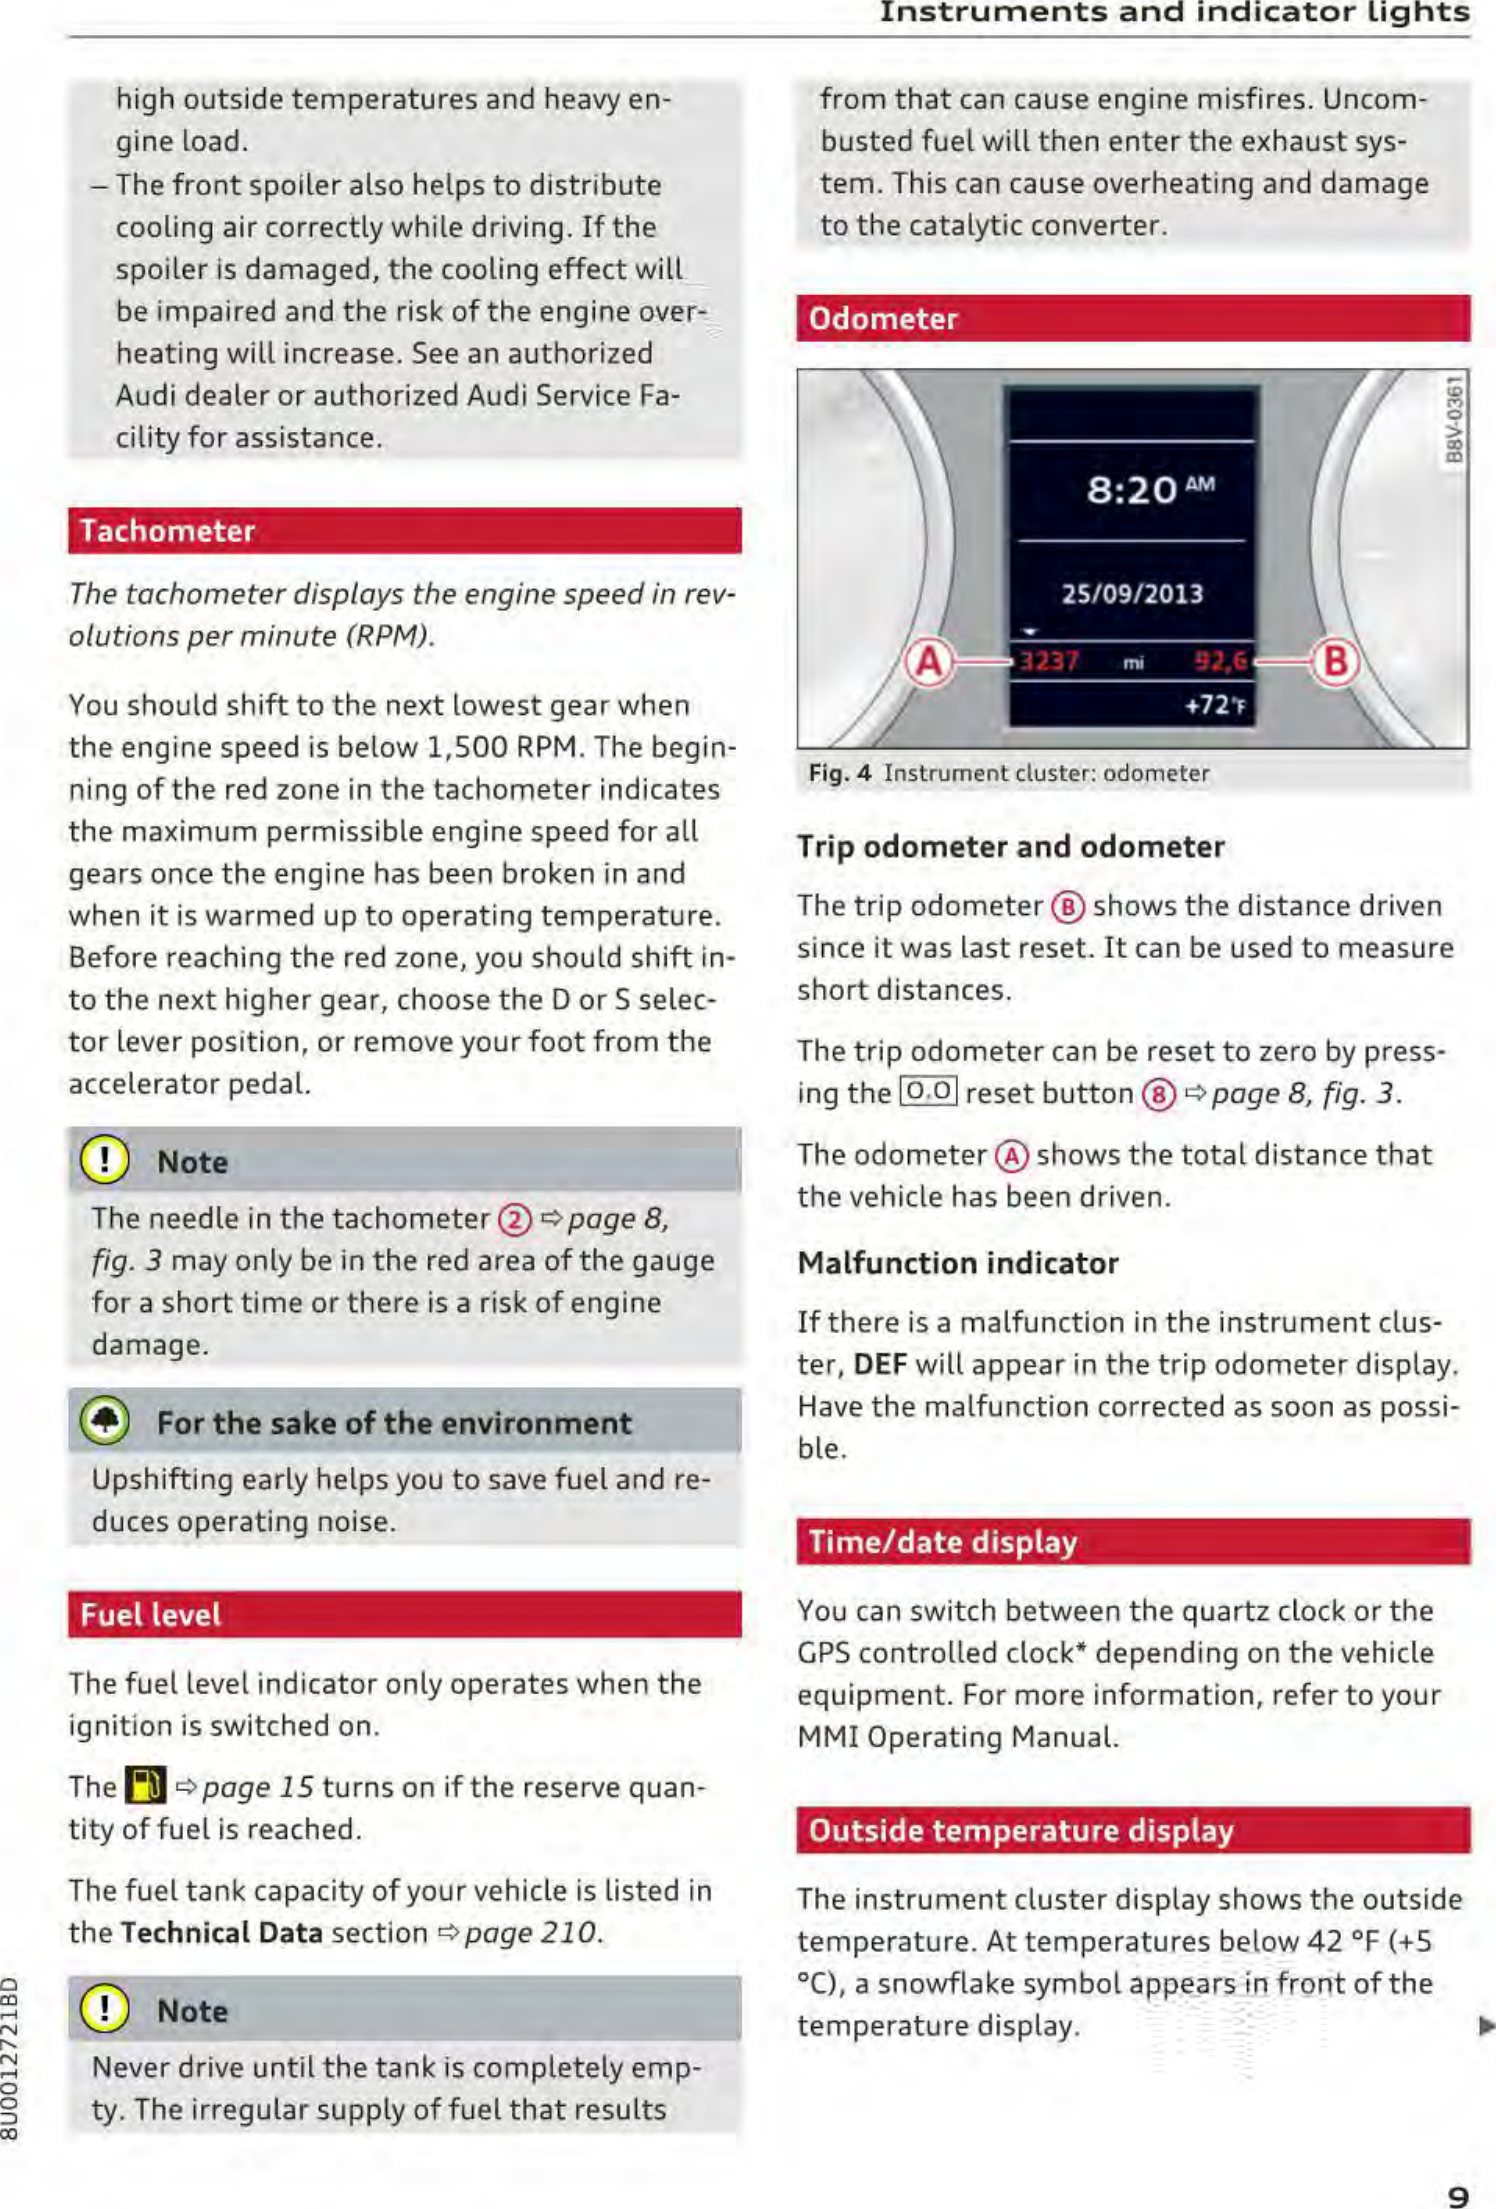 Page 11 of Robert Bosch Car Multimedia AUFPK20 Instrument cluster with immobilizer User Manual part 1